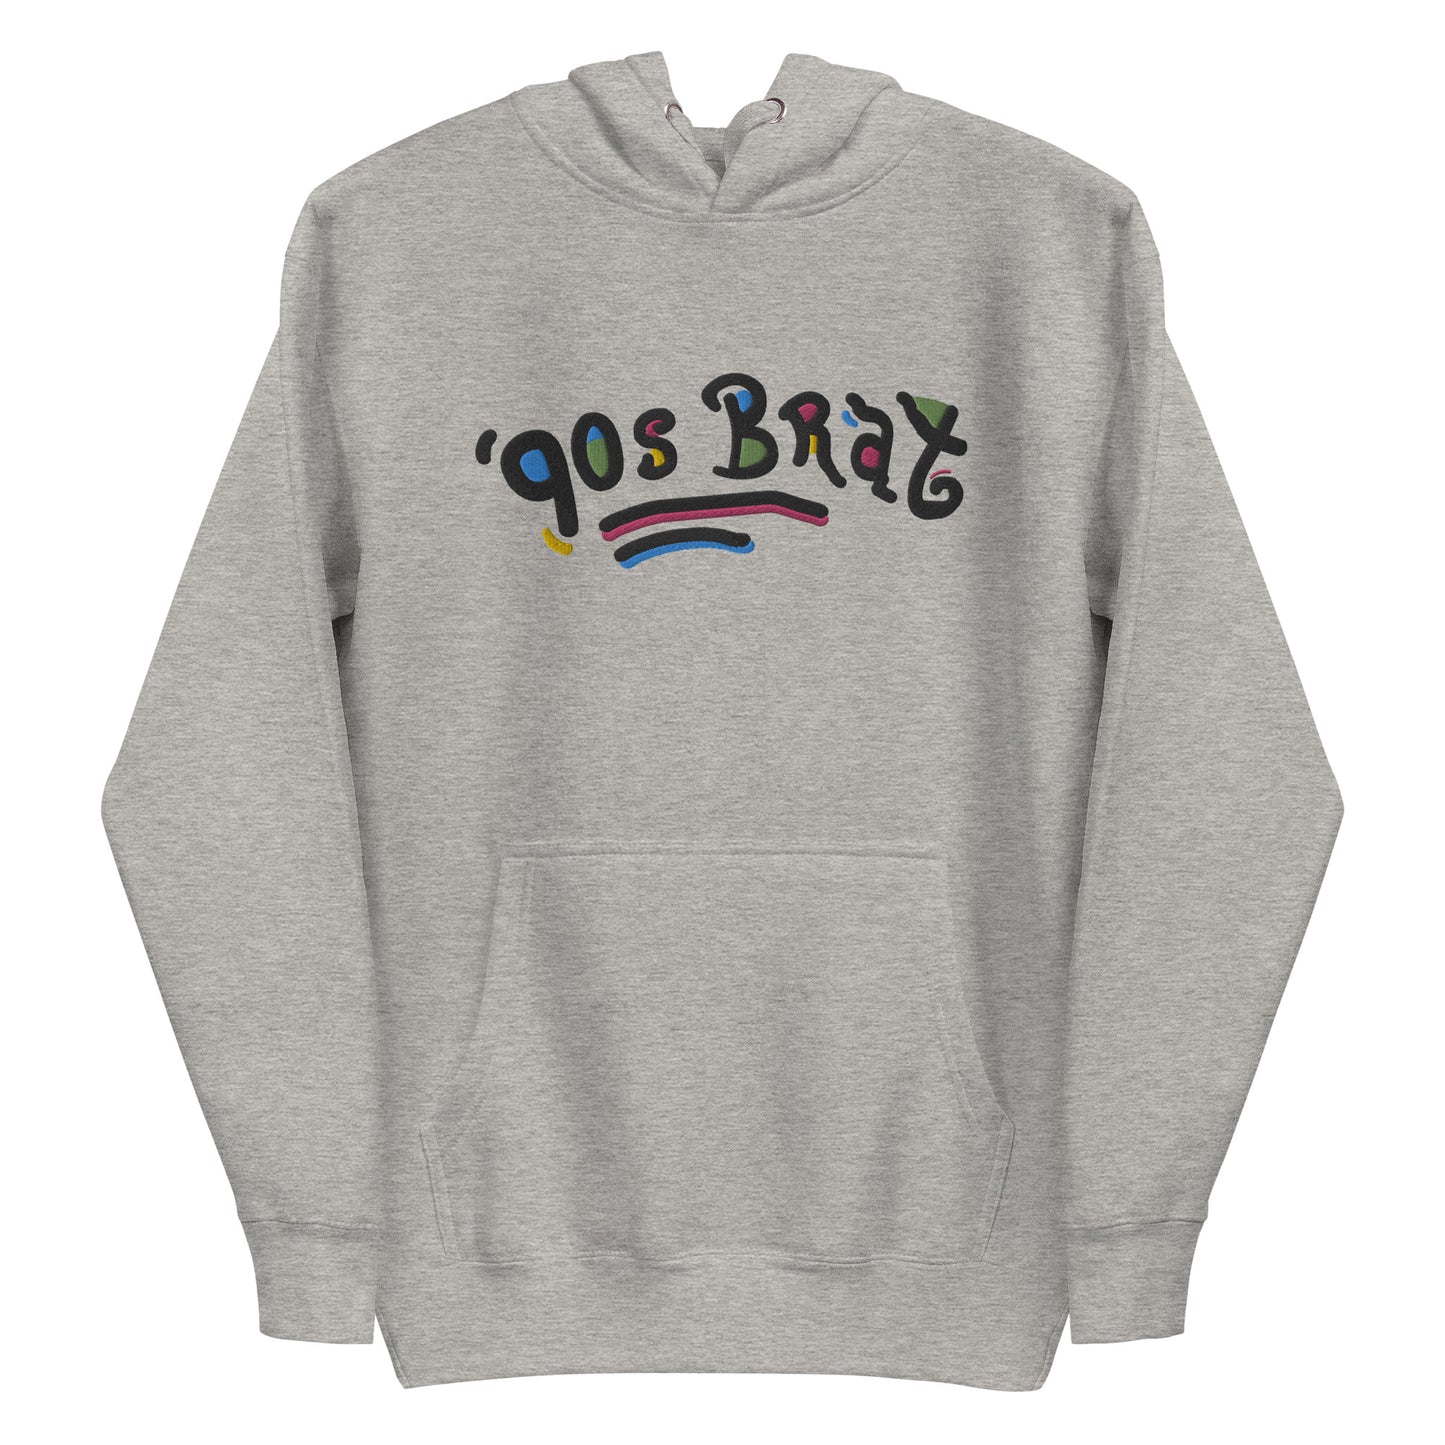 90s Brat embroidered hoodie